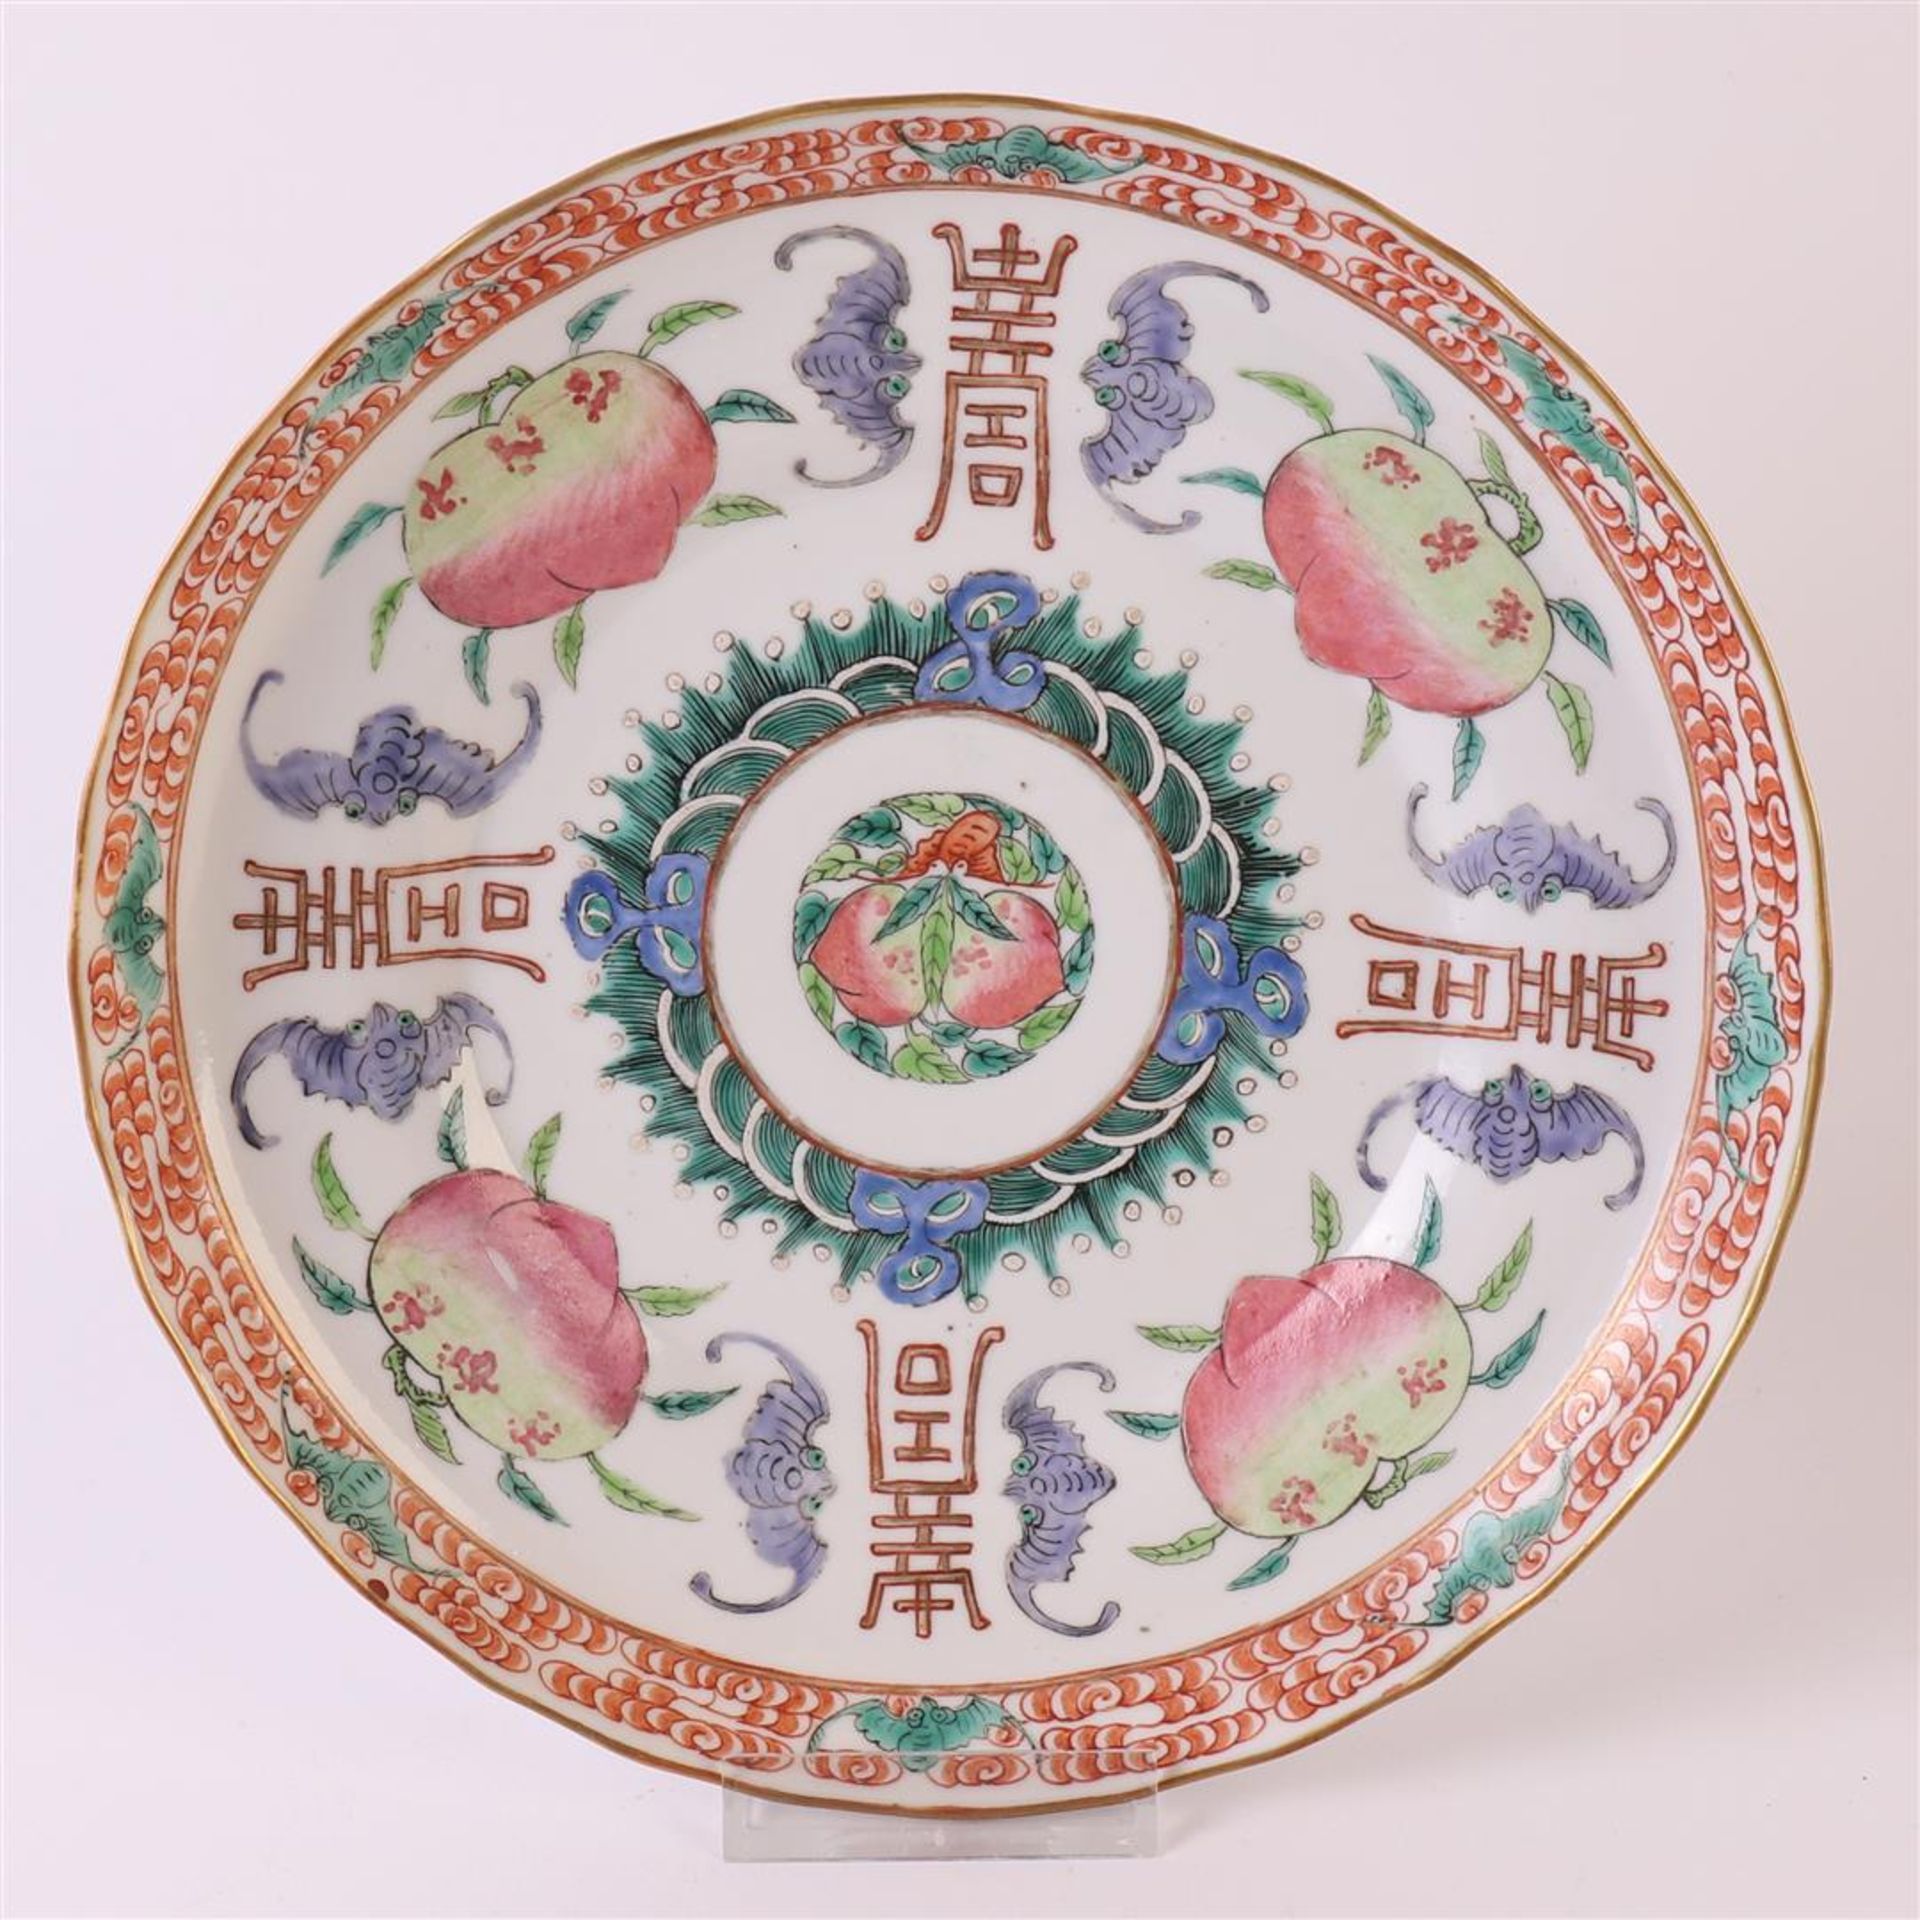 A slightly contoured porcelain dish, Japan, 19th century. Polychrome decor of peaches, bats and